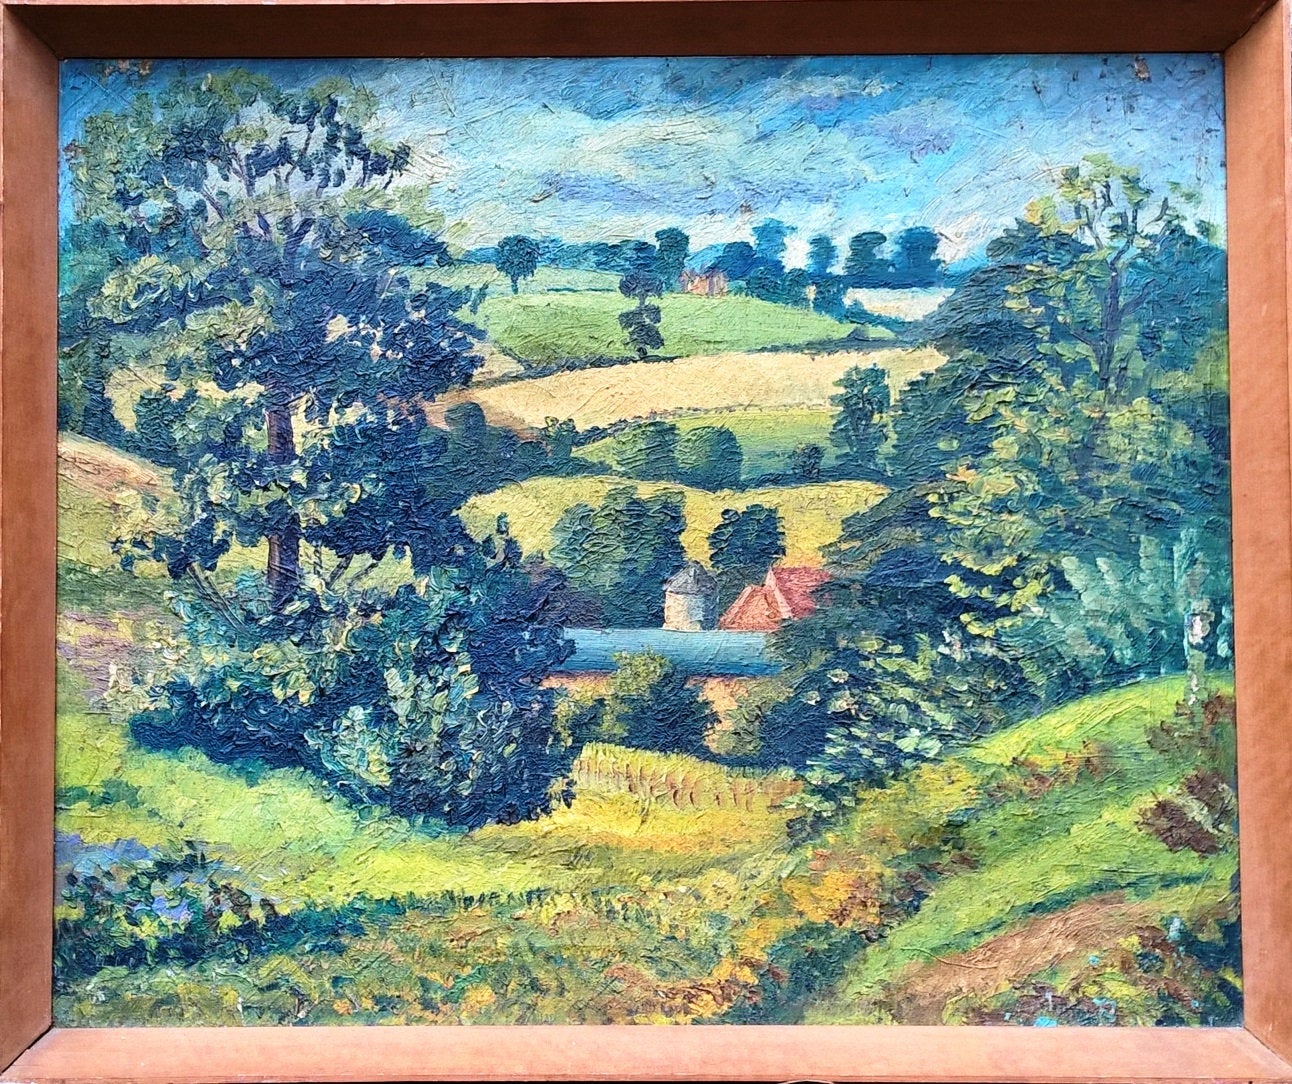 Tom Wright’s Suffolk landscape concealed the original for 70 years